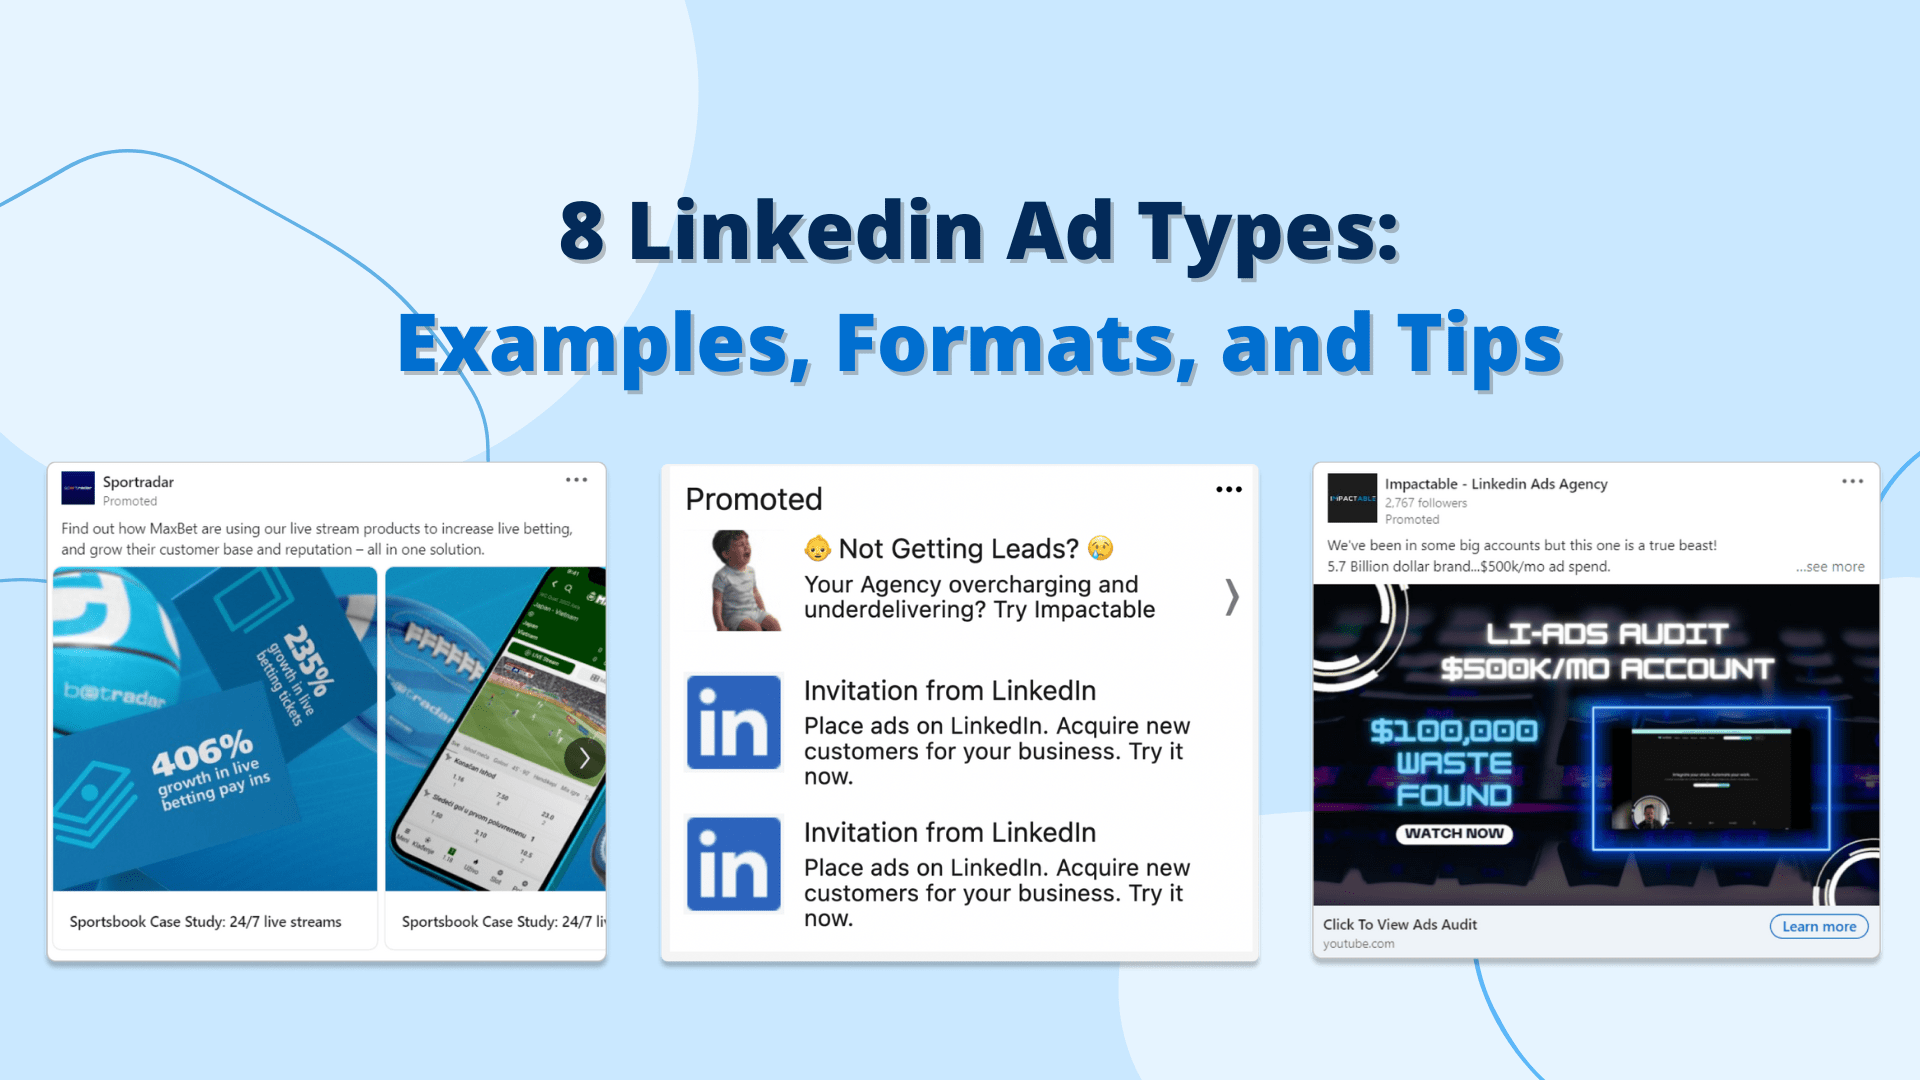 8 Linkedin Ad Types Examples, Formats, and Tips IMPACTABLE